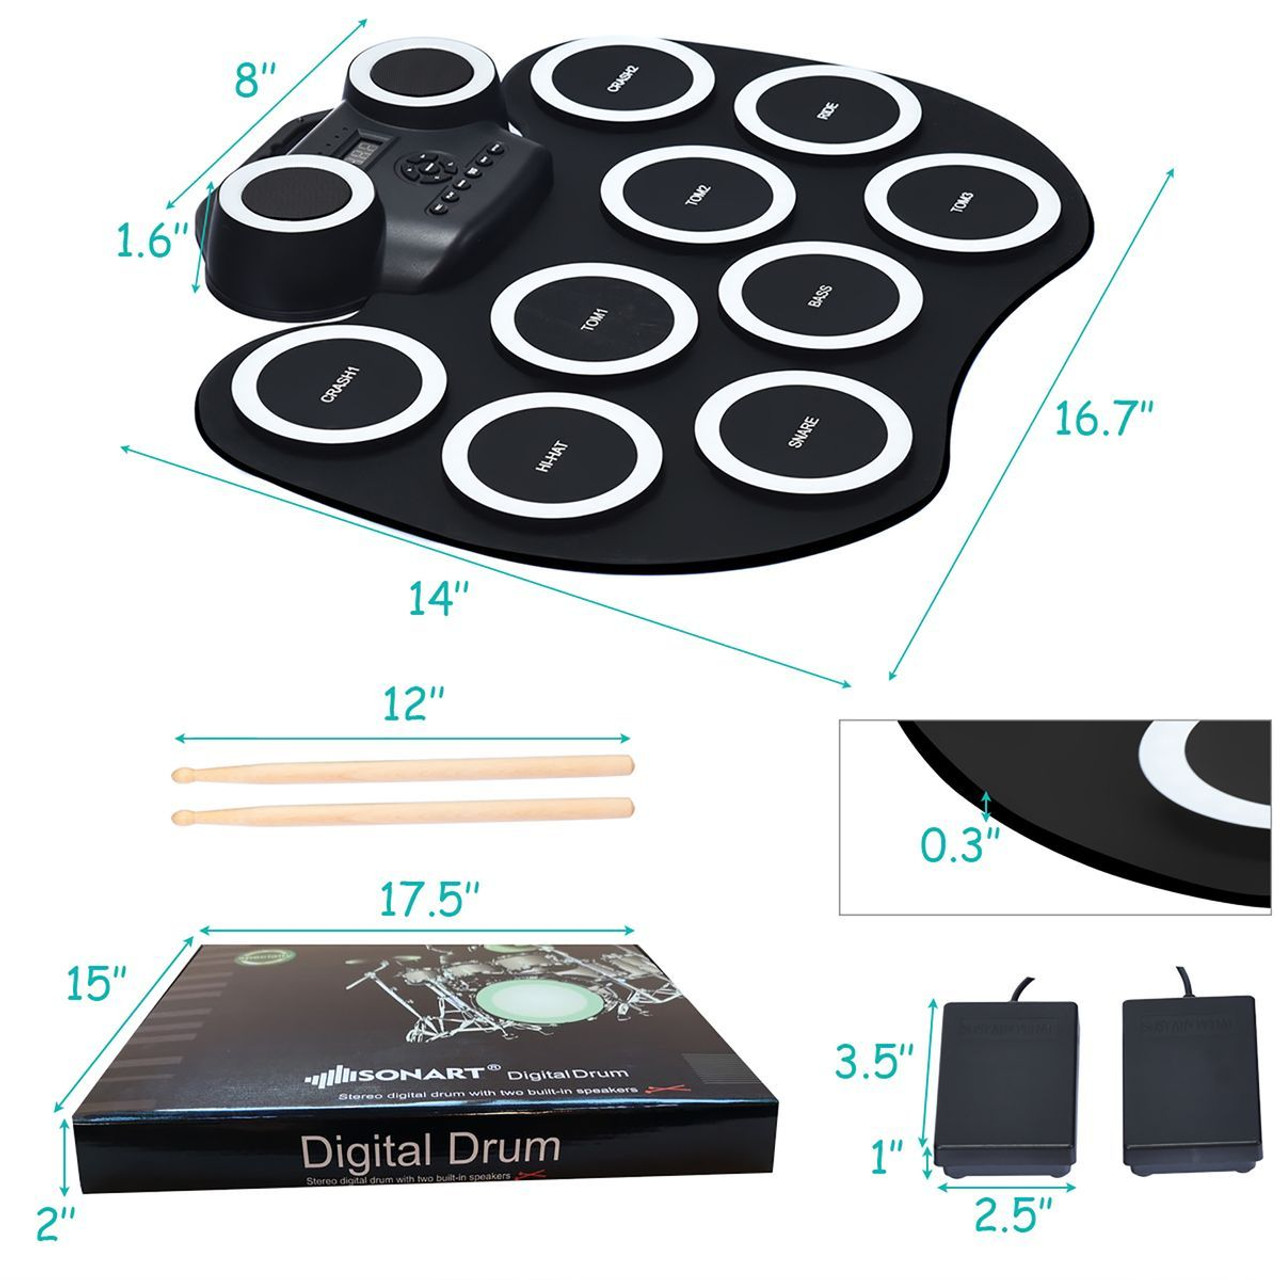 Costway Electronic Drum Set with 9 Pads, MIDI, Speaker, Headphone product image